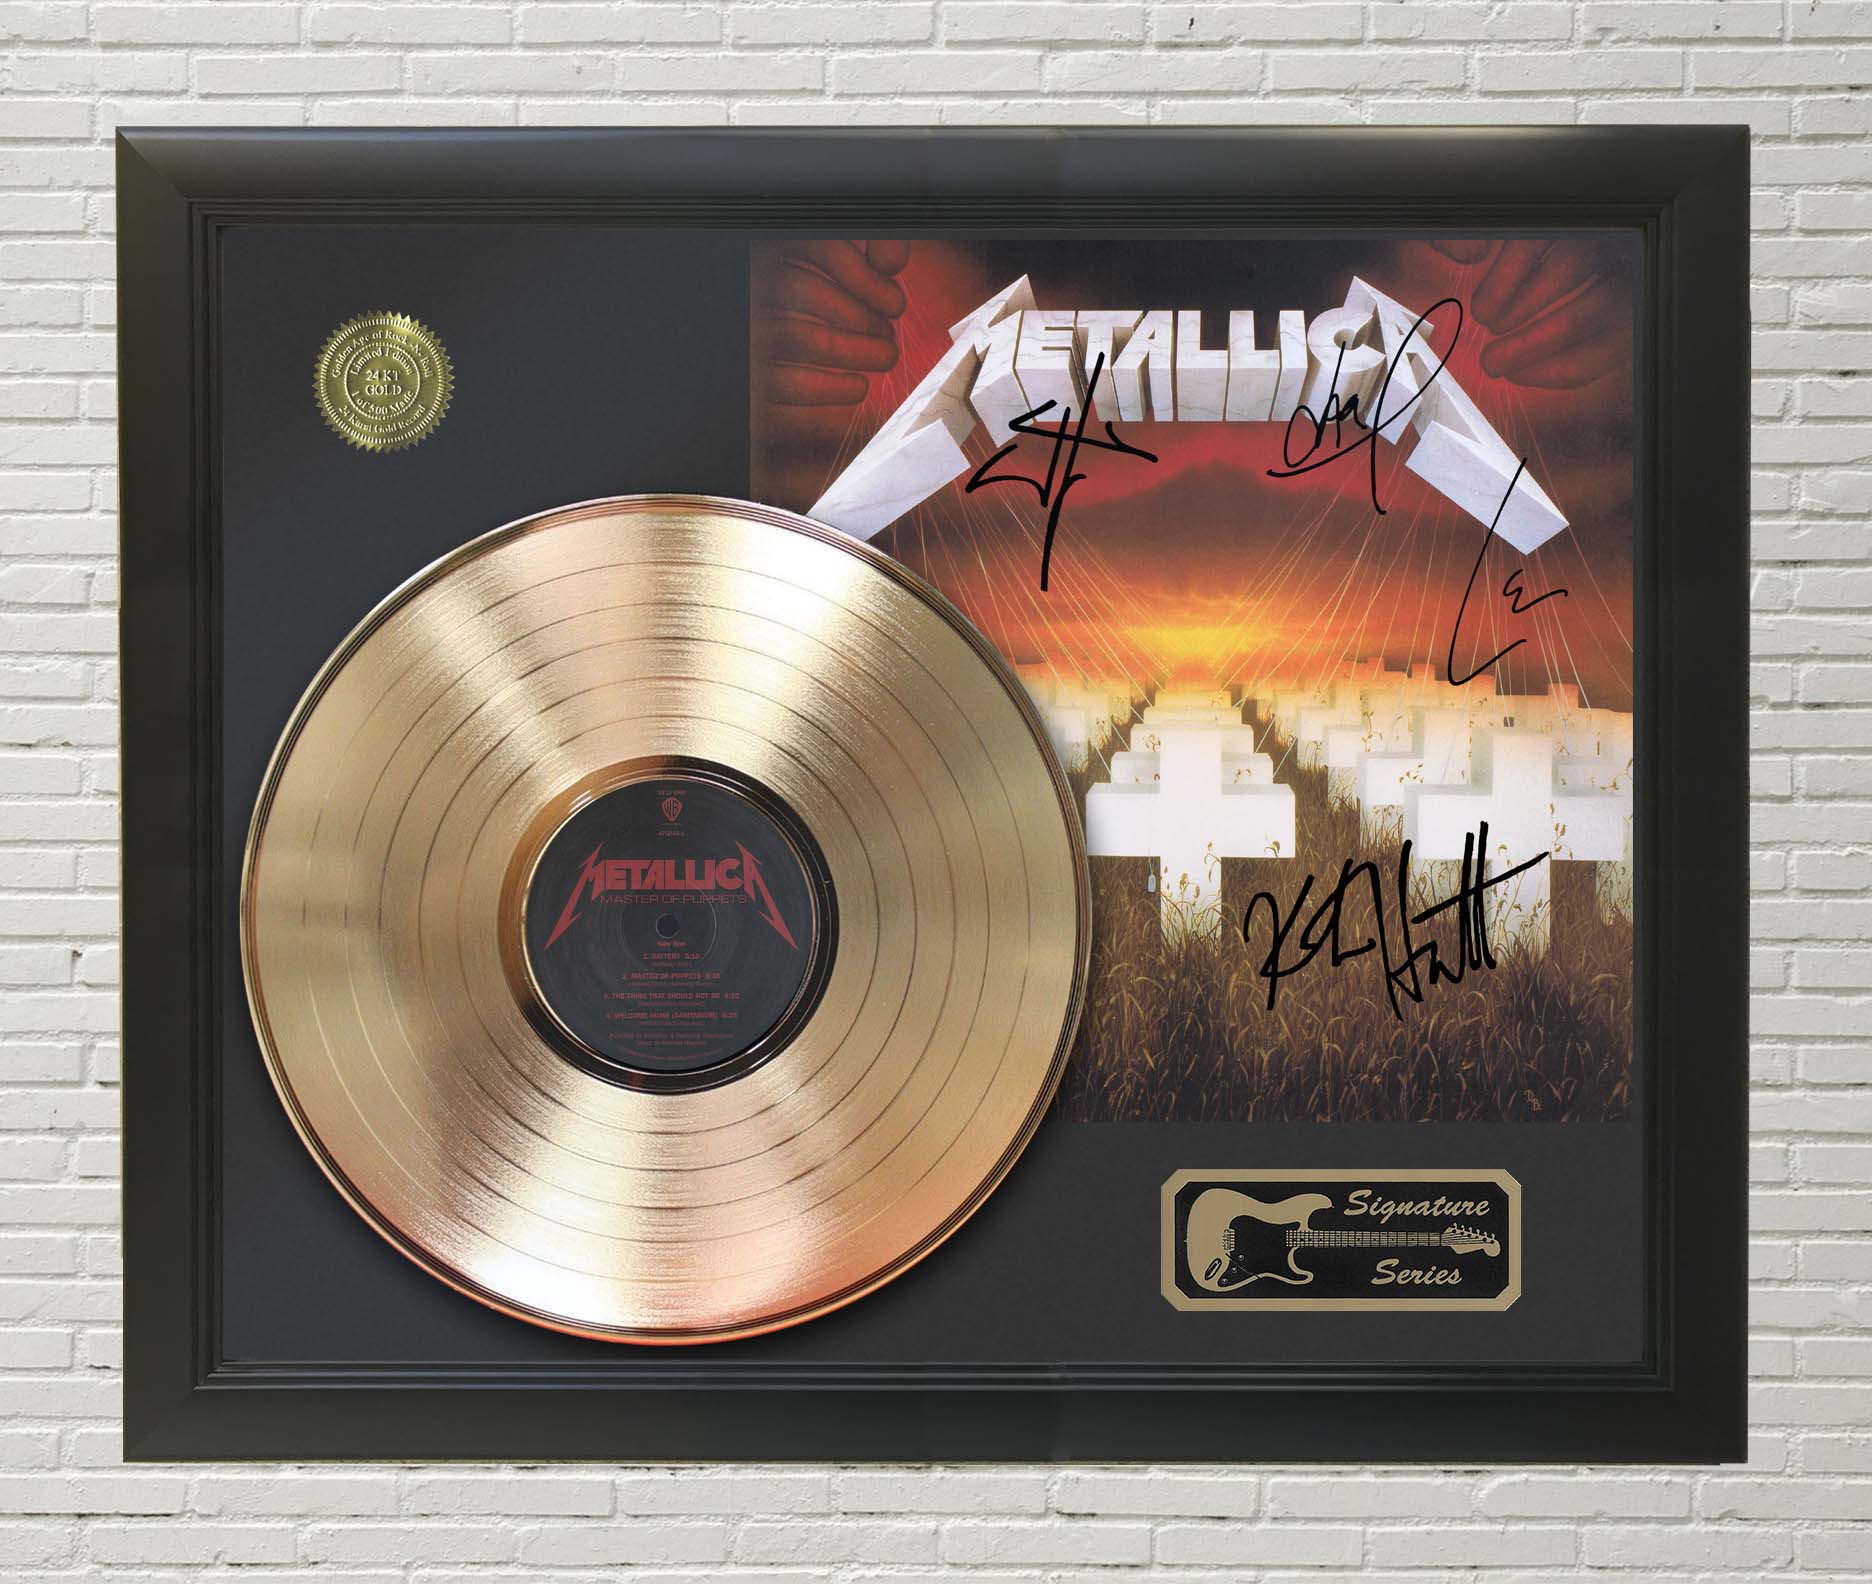 Metallica - Master of Puppets Framed Signature Gold LP Record Display M4